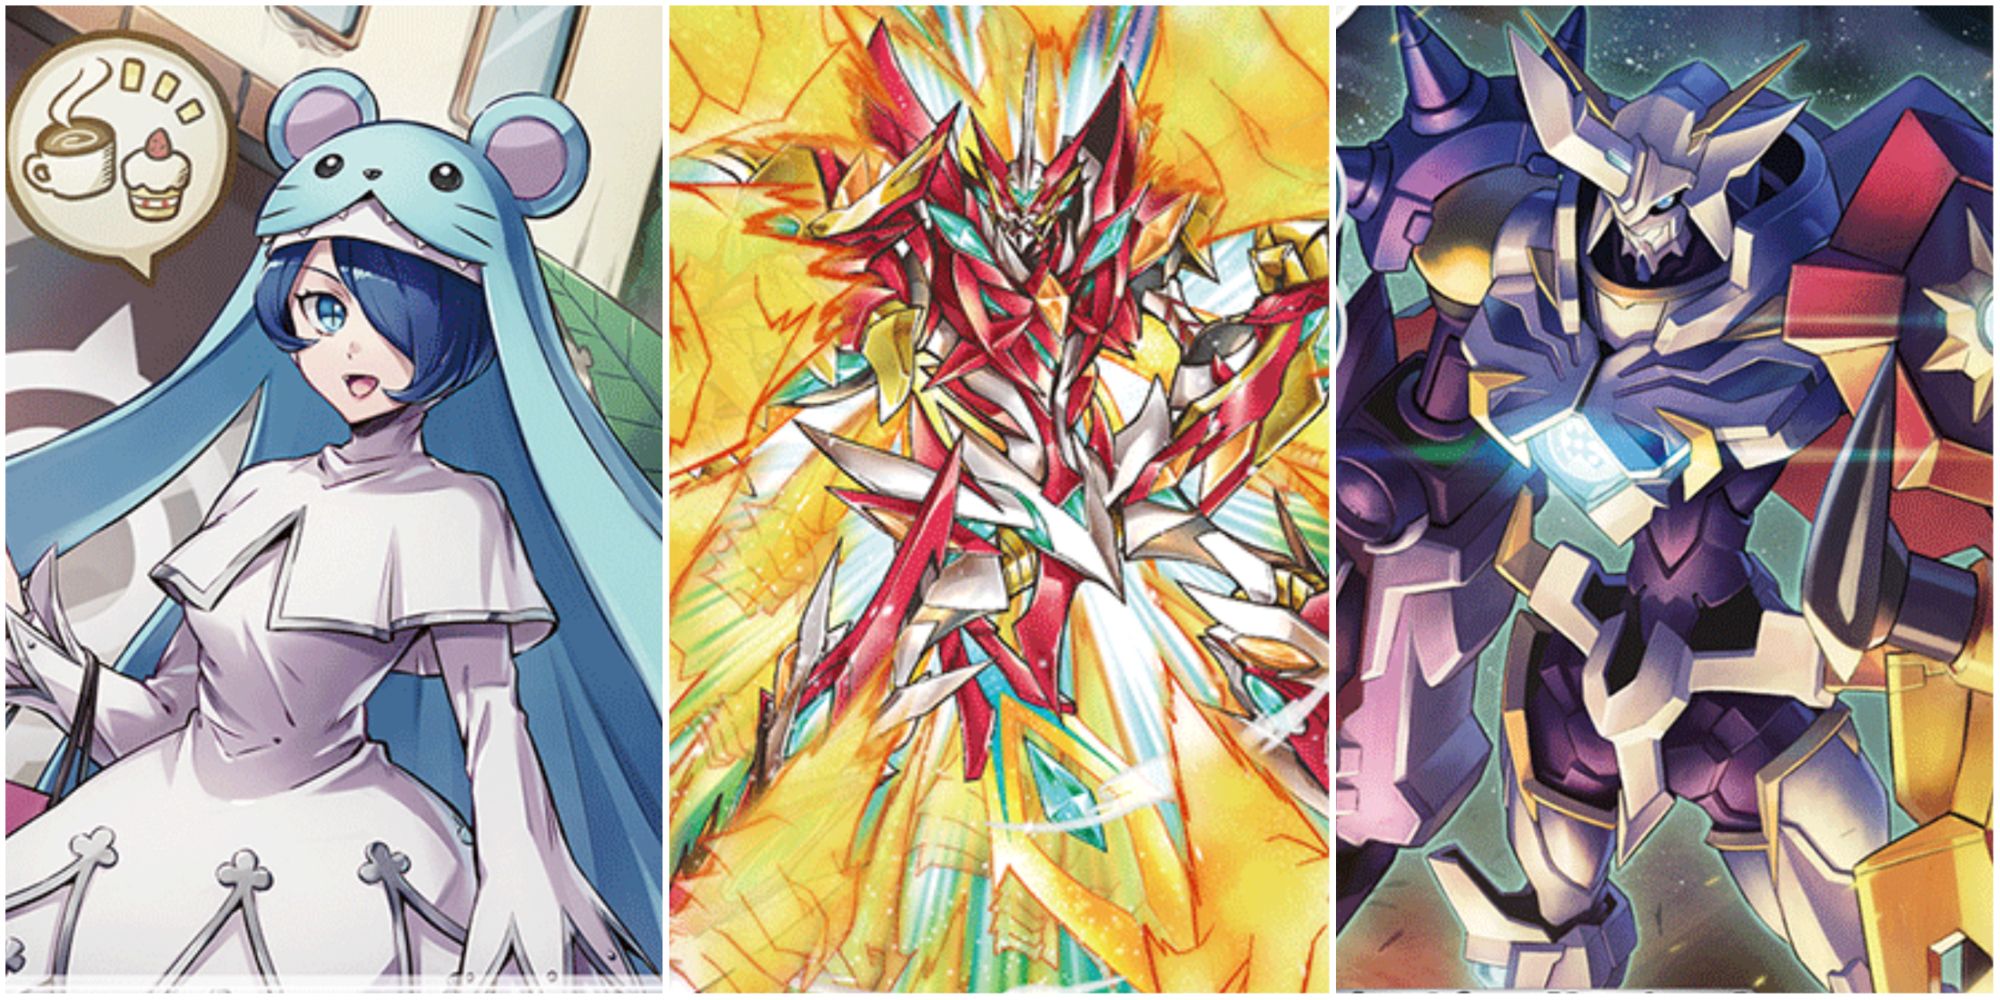 sistermon ciel jesmon gx and omnimon x antibody in collage from digimon card game bt10